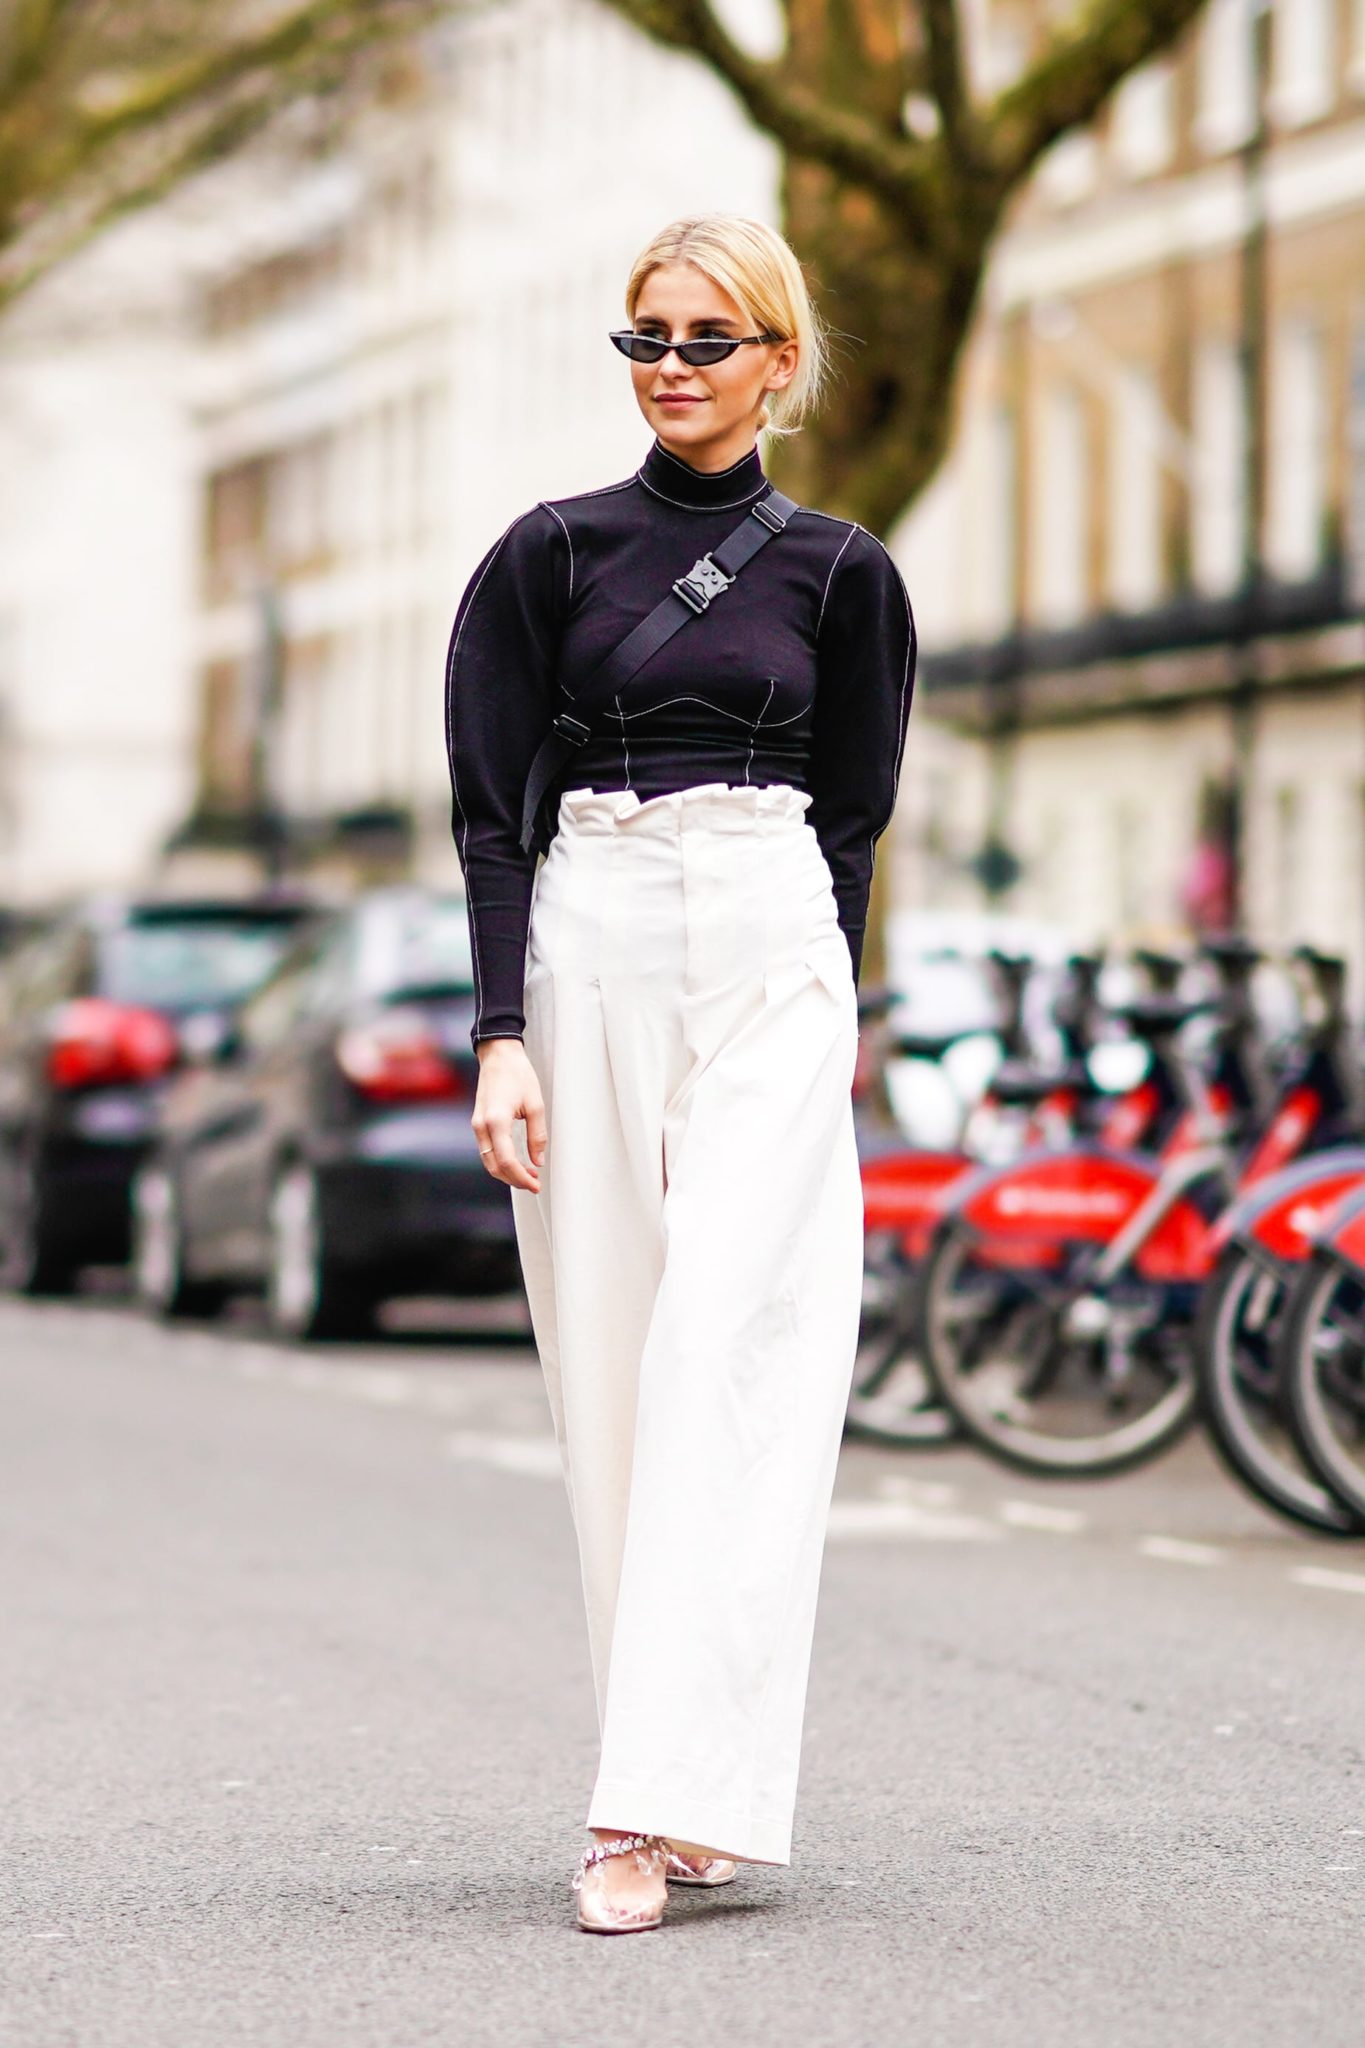 High Waist Pants For Women With Styling Tips – Fashion